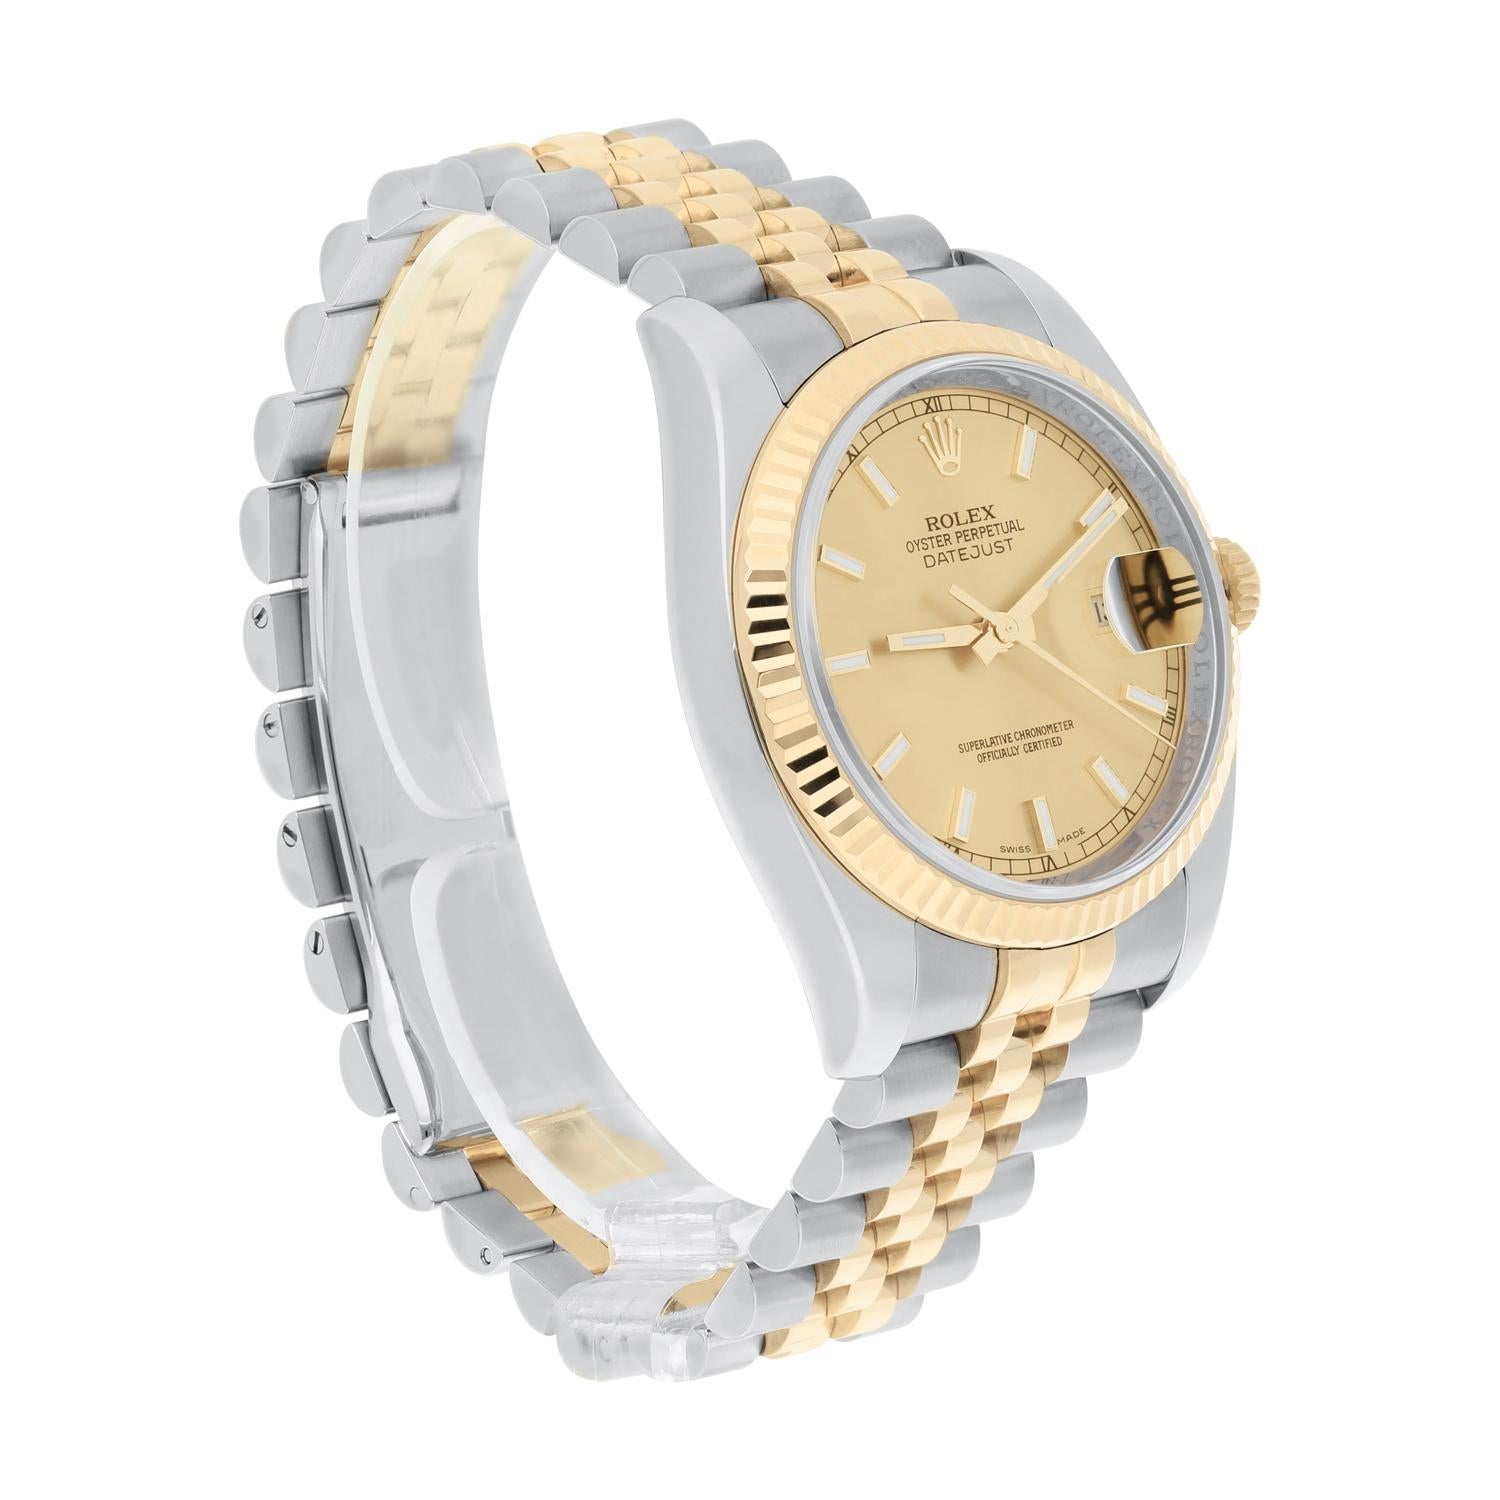 Rolex Datejust 36 Gold and Steel 116233 Watch Champagne Index Dial Jubilee Watch For Sale 2